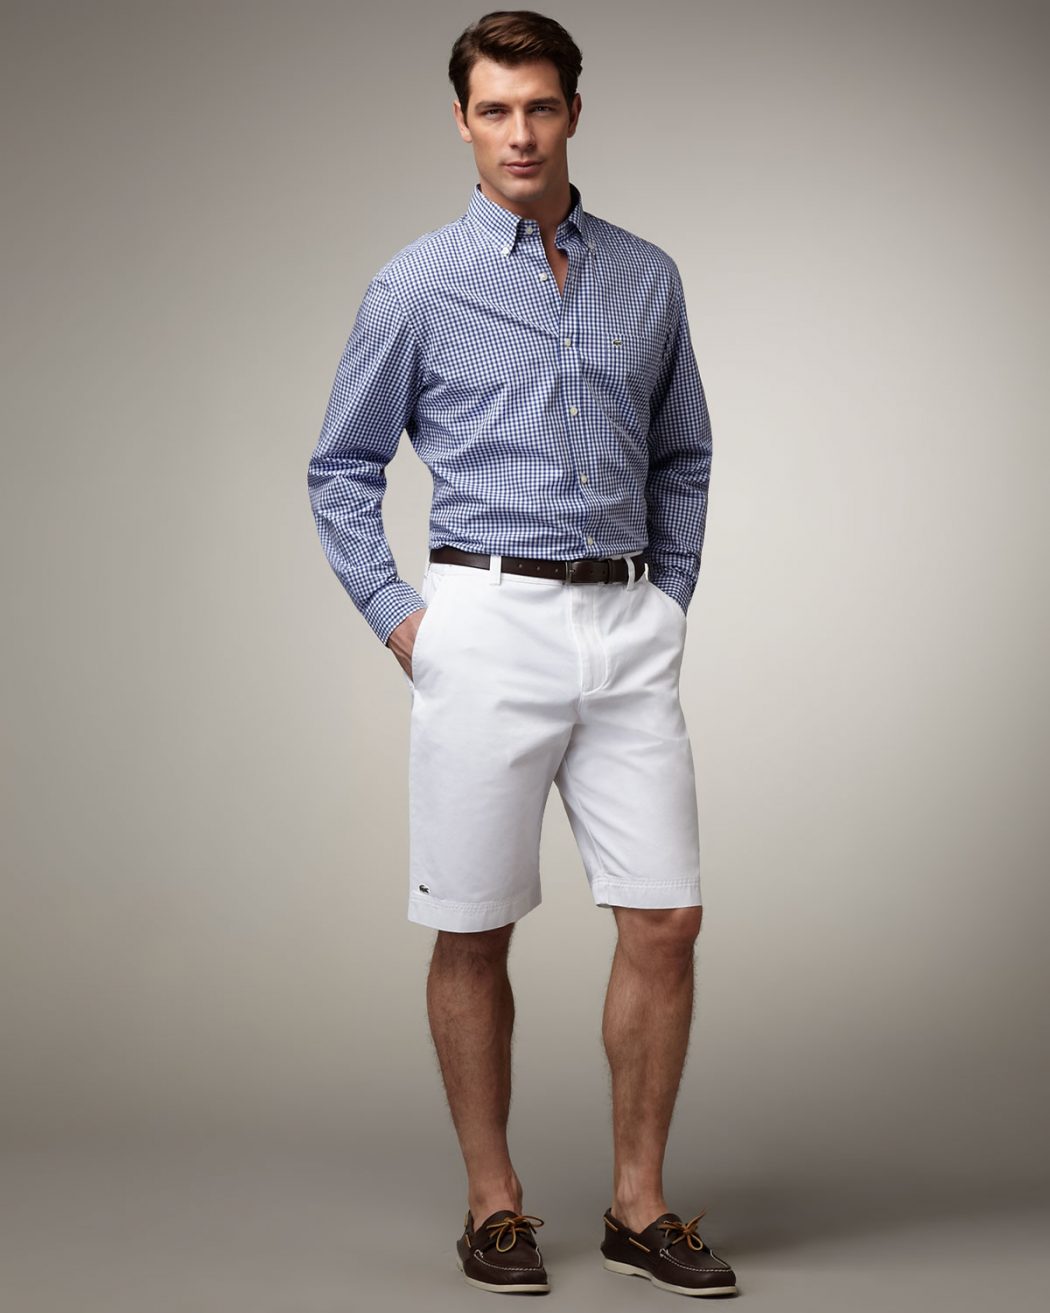 10 Most Stylish Outfits For Guys In Summer